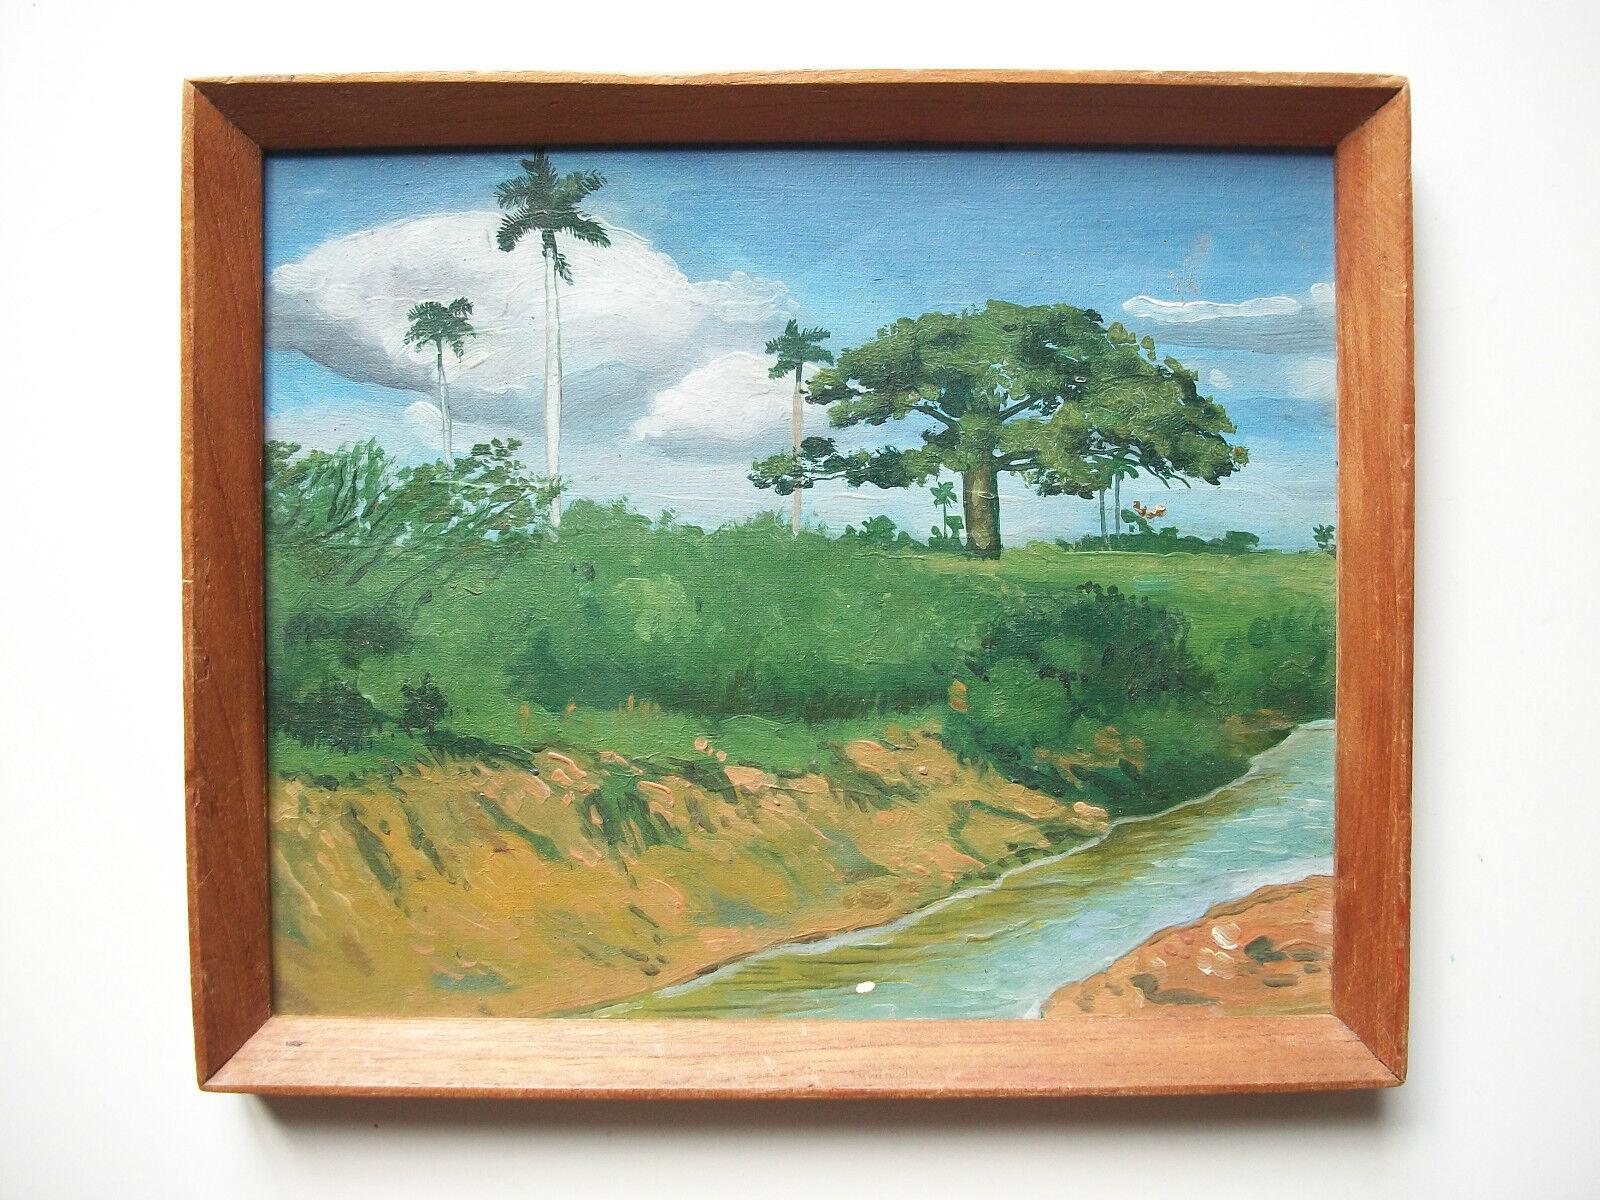 Folk Art Cuban Contemporary Landscape Oil Painting on Canvas - Unsigned - Late 20th C. For Sale